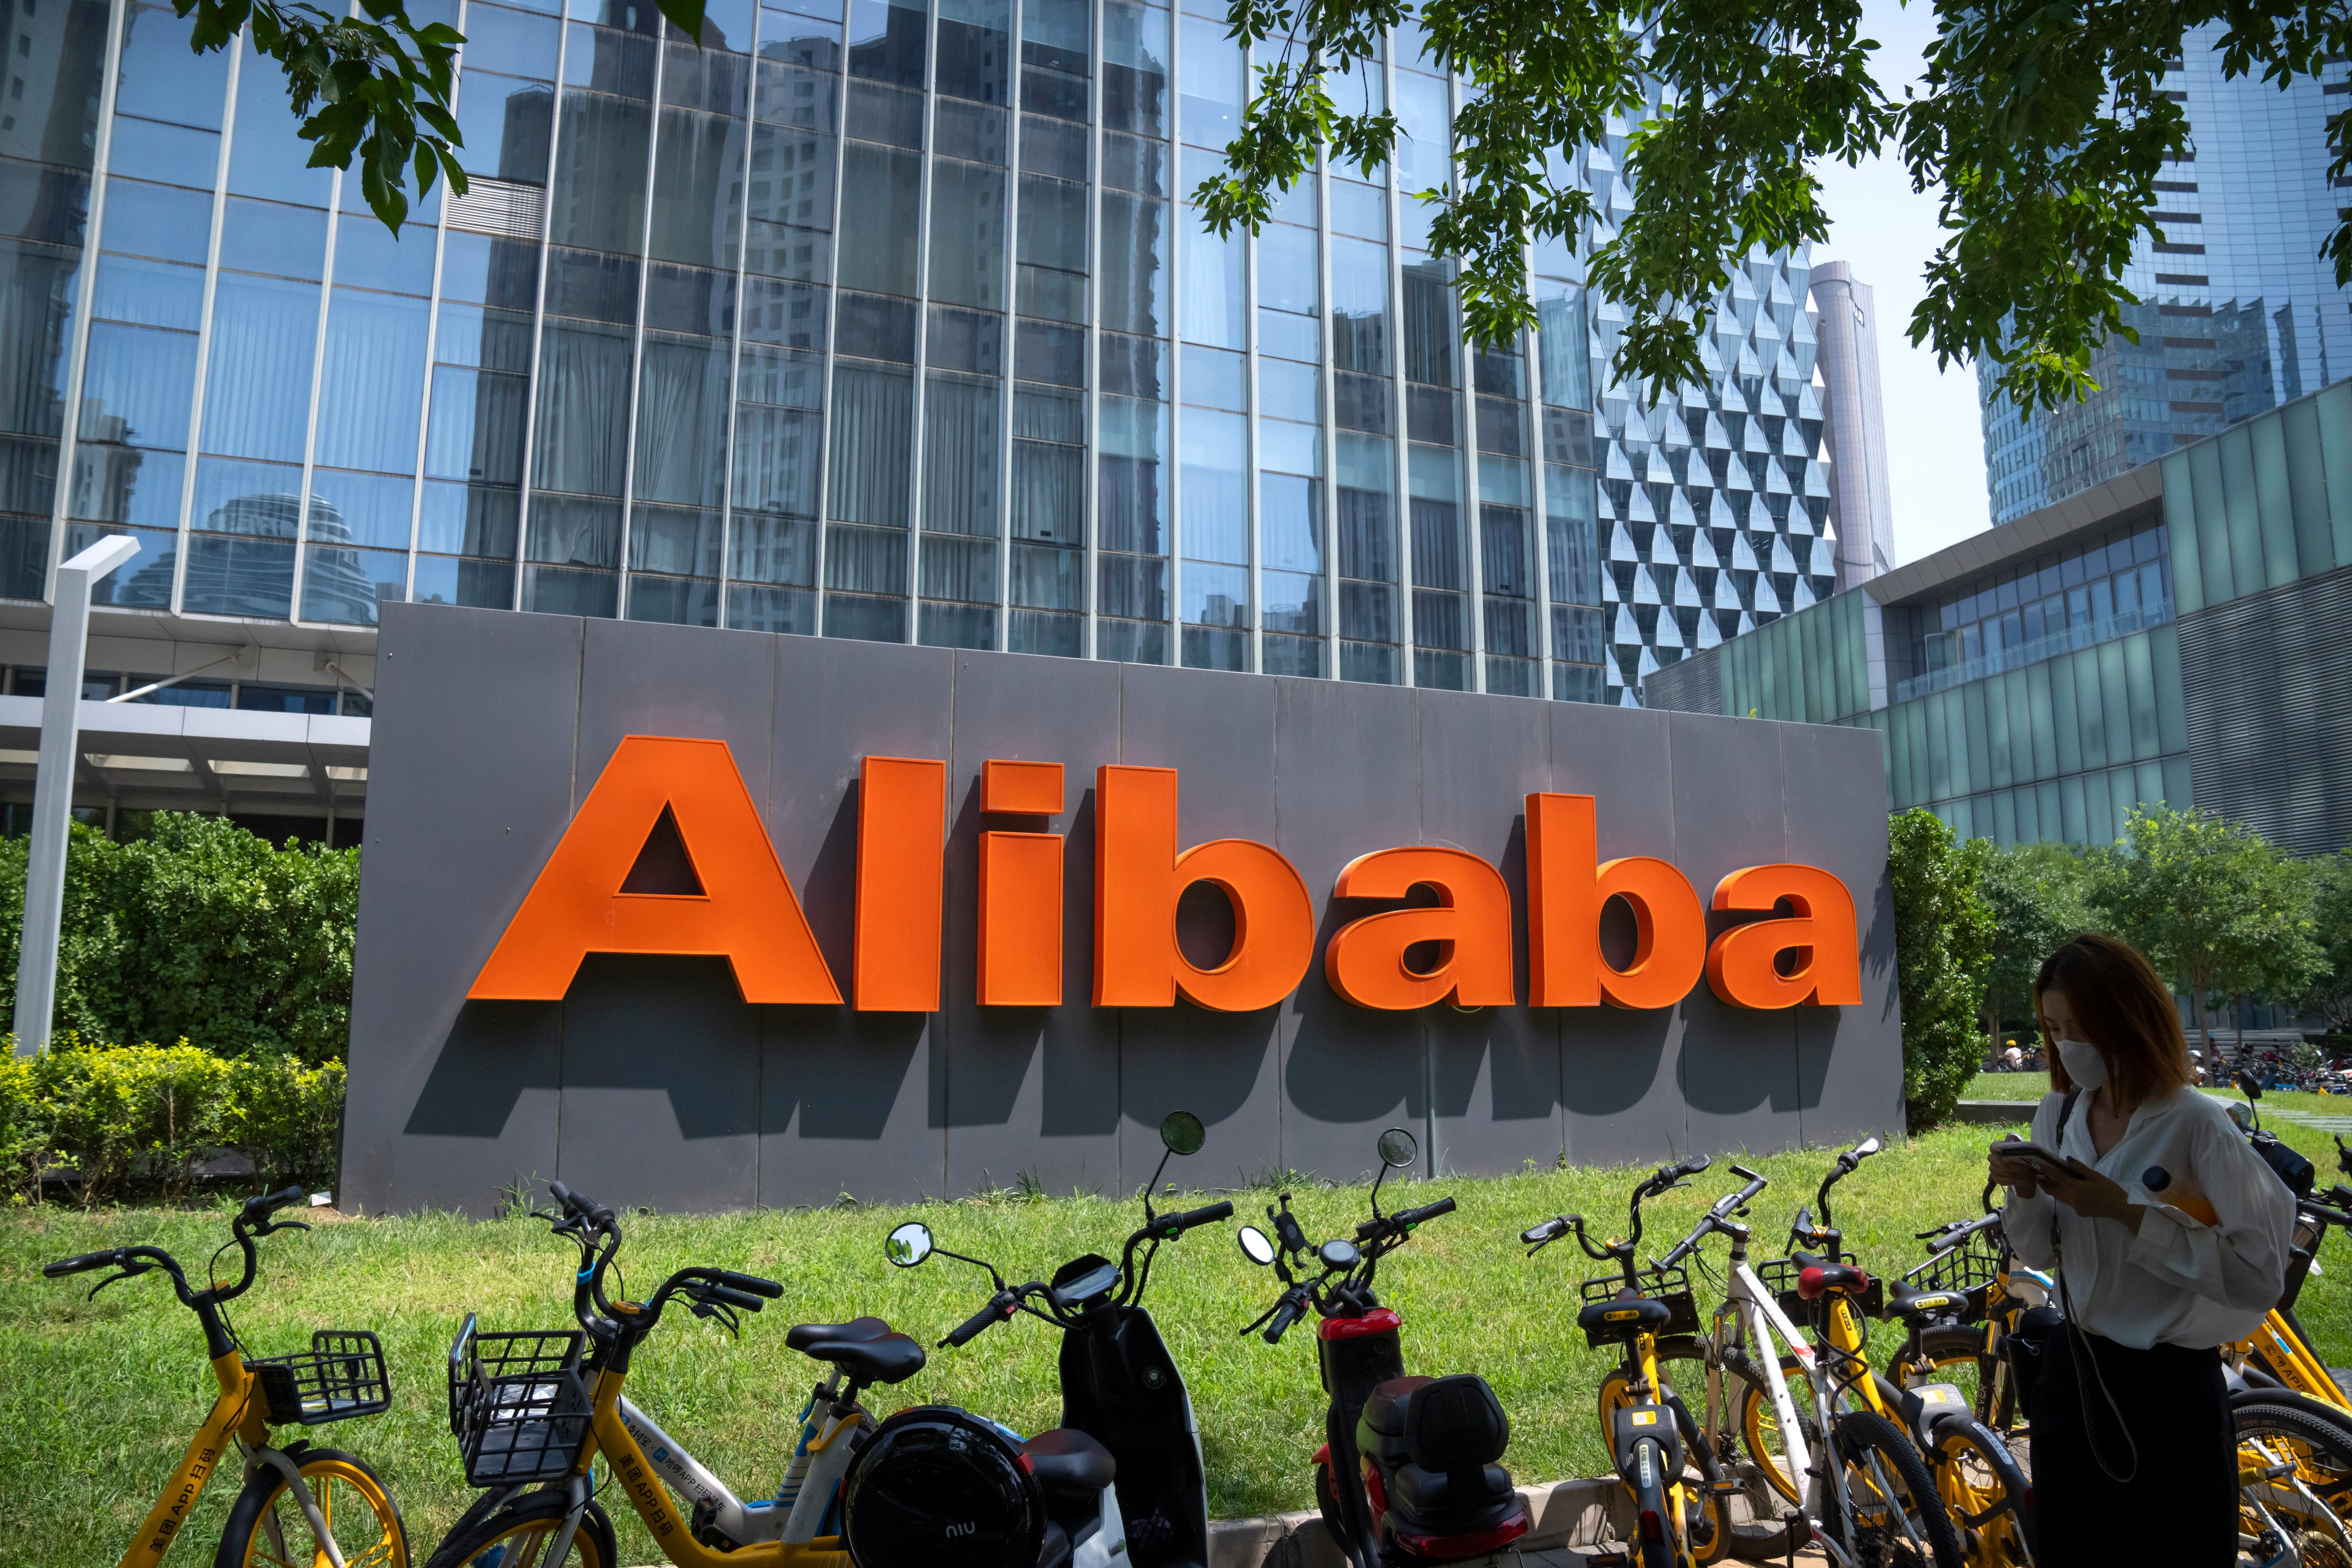 The logo of Chinese technology firm Alibaba is seen at its office in Beijing E-commerce group Alibaba rallied after the company said it rewarded shareholders with US$5.8 billion in share buy-backs last quarter. Photo: AP